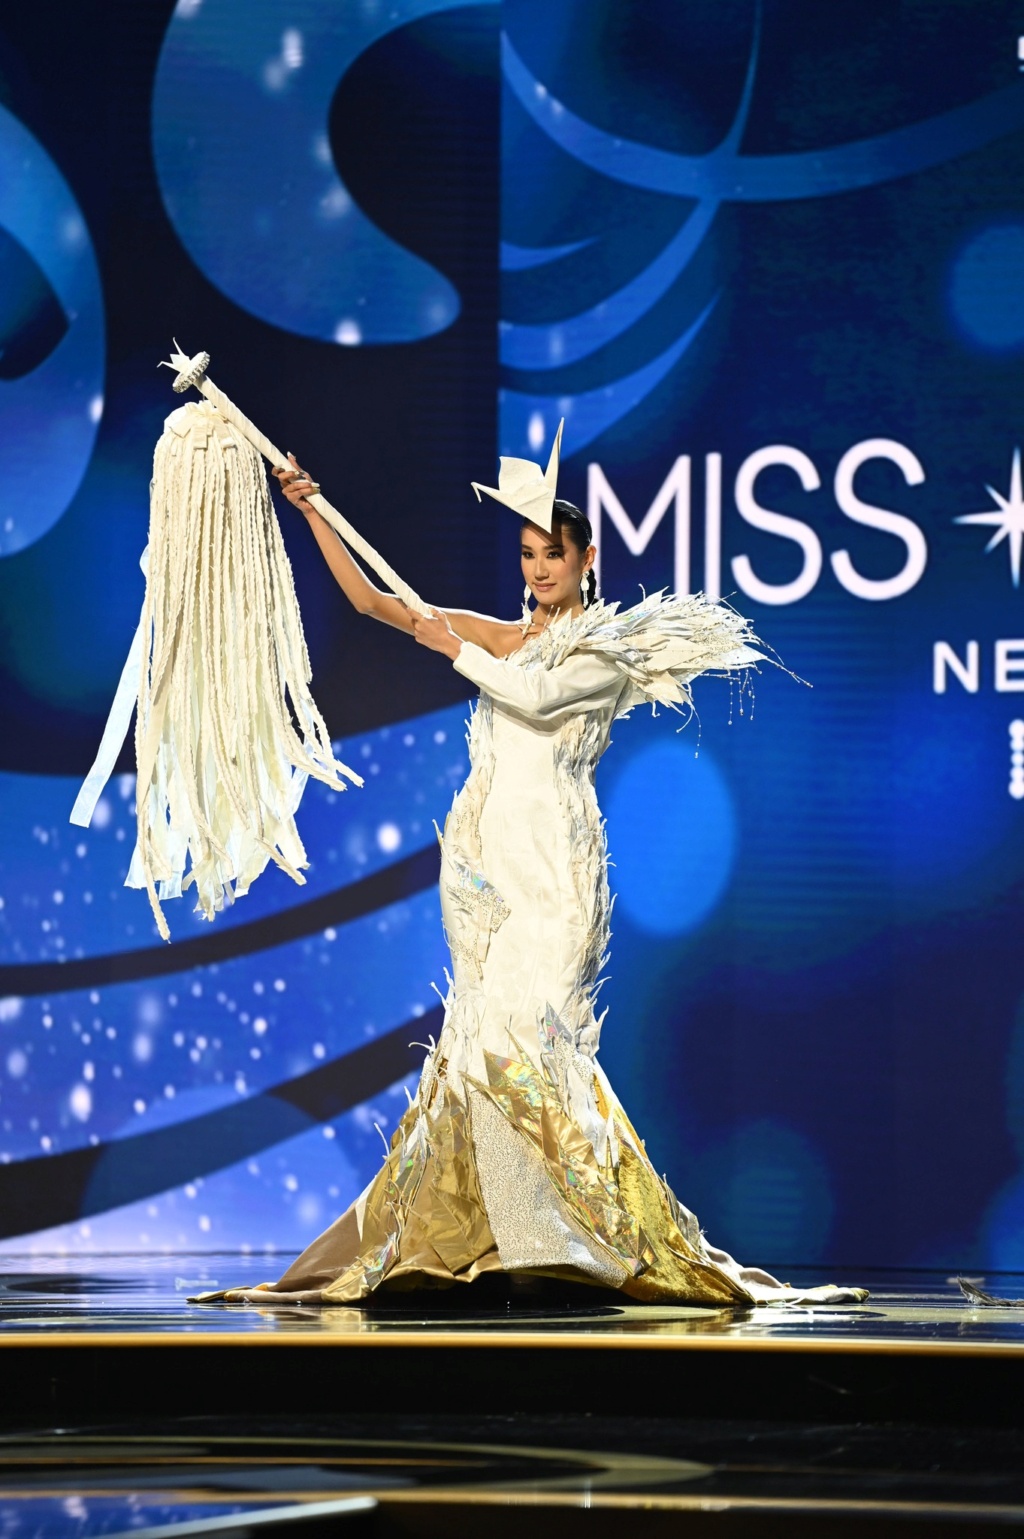  ♔ MISS UNIVERSE 2022 - NATIONAL COSTUME  ♔ - Page 2 32537910